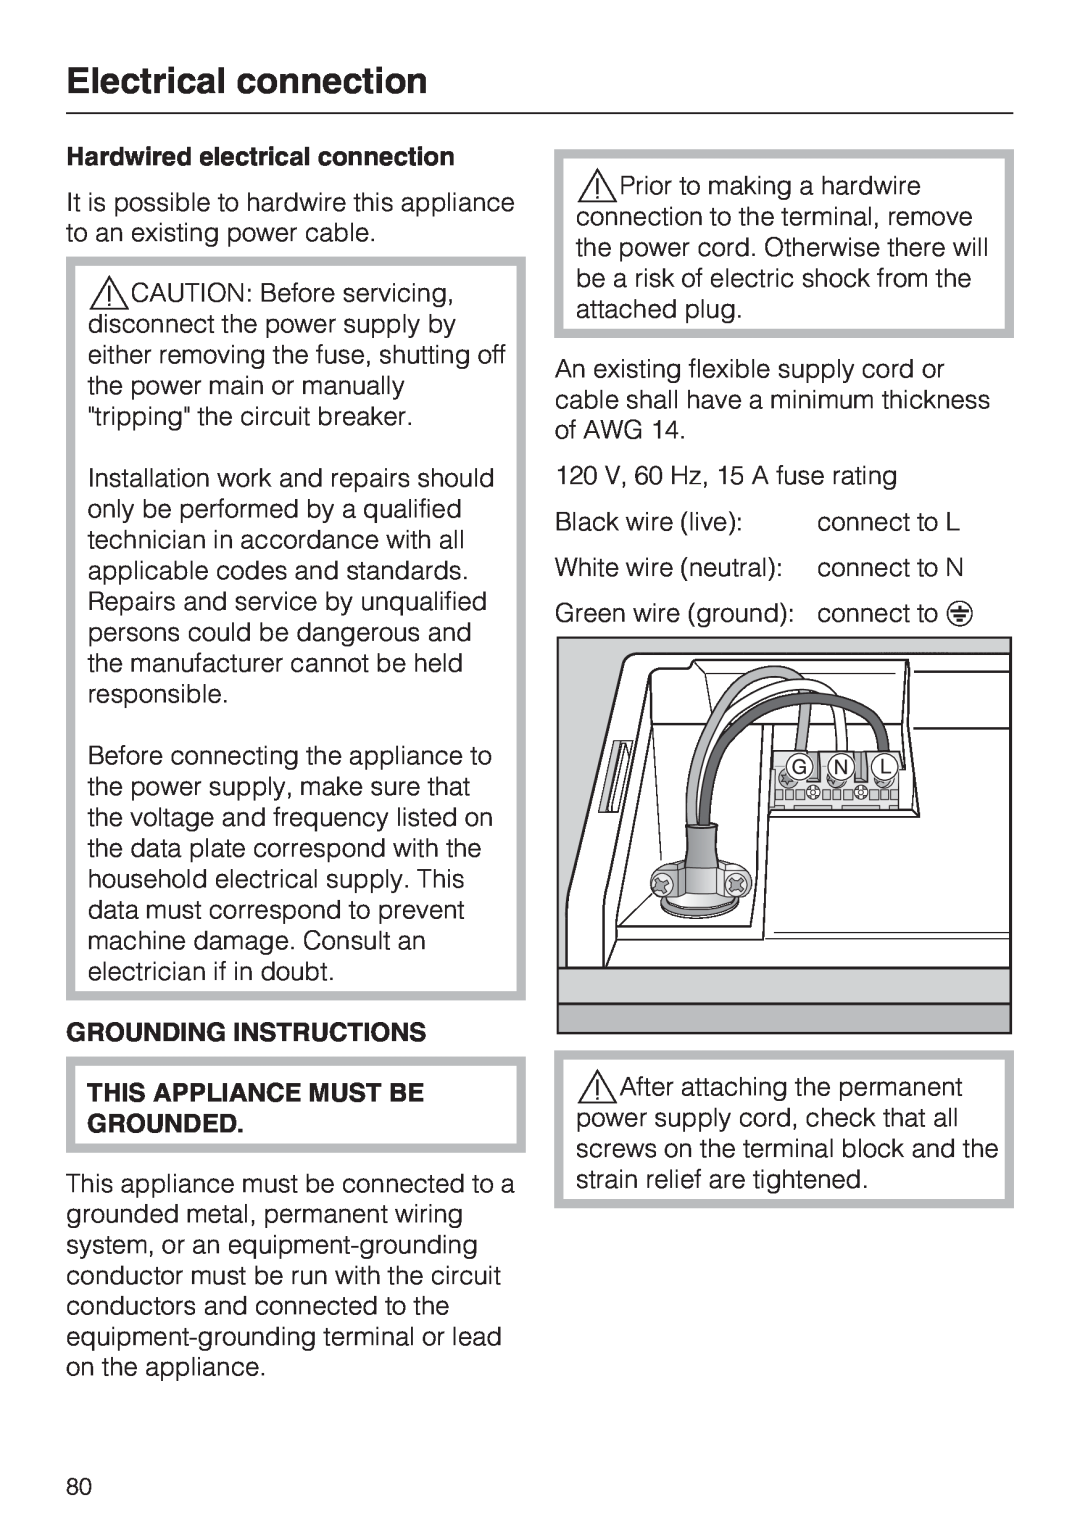 Miele G 5915, G 5910 operating instructions Electrical connection, Hardwired electrical connection, Grounding Instructions 